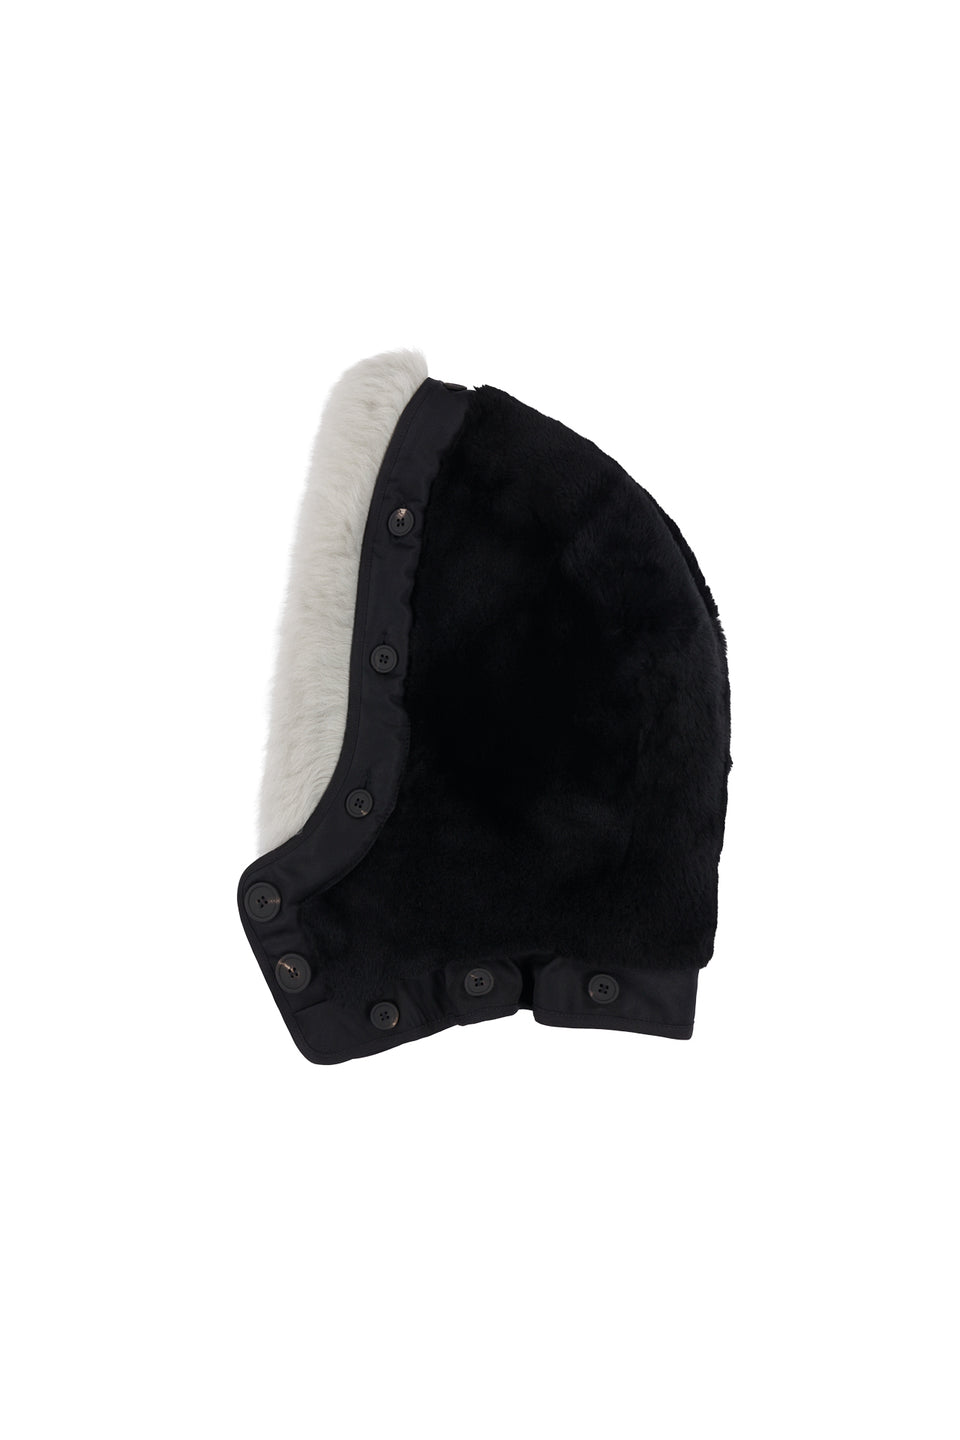 Shearling Quilt Hood - Black / Anthracite (listing page thumbnail)